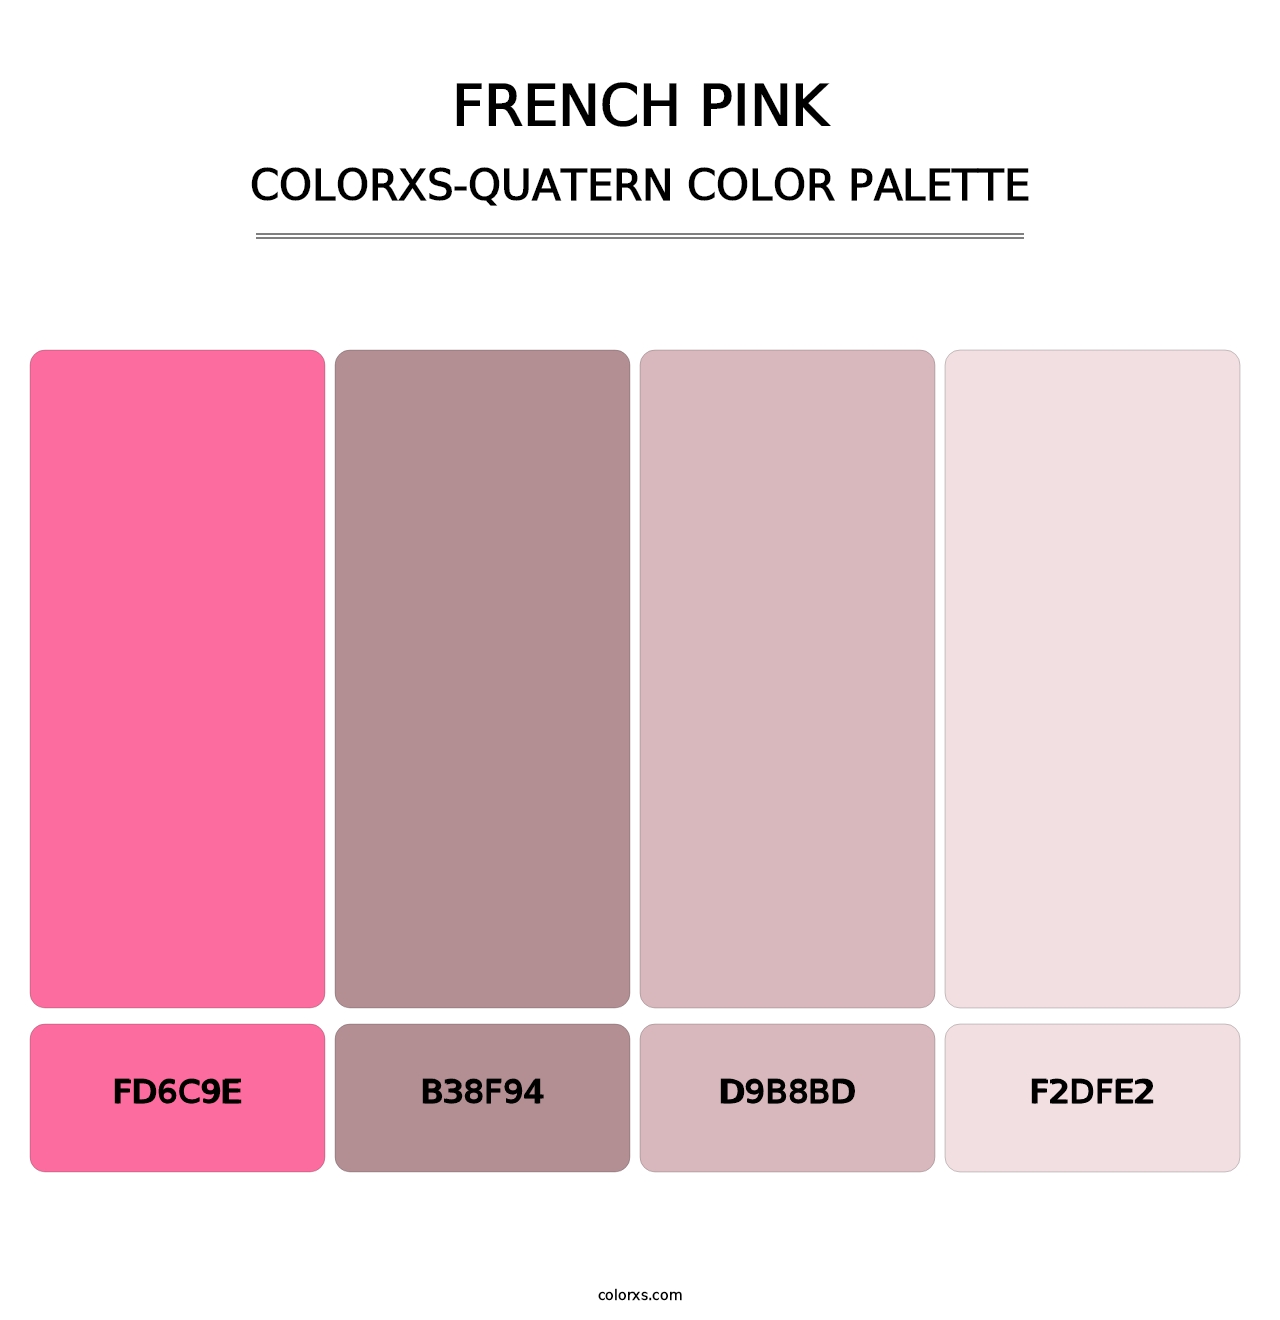 French Pink - Colorxs Quatern Palette